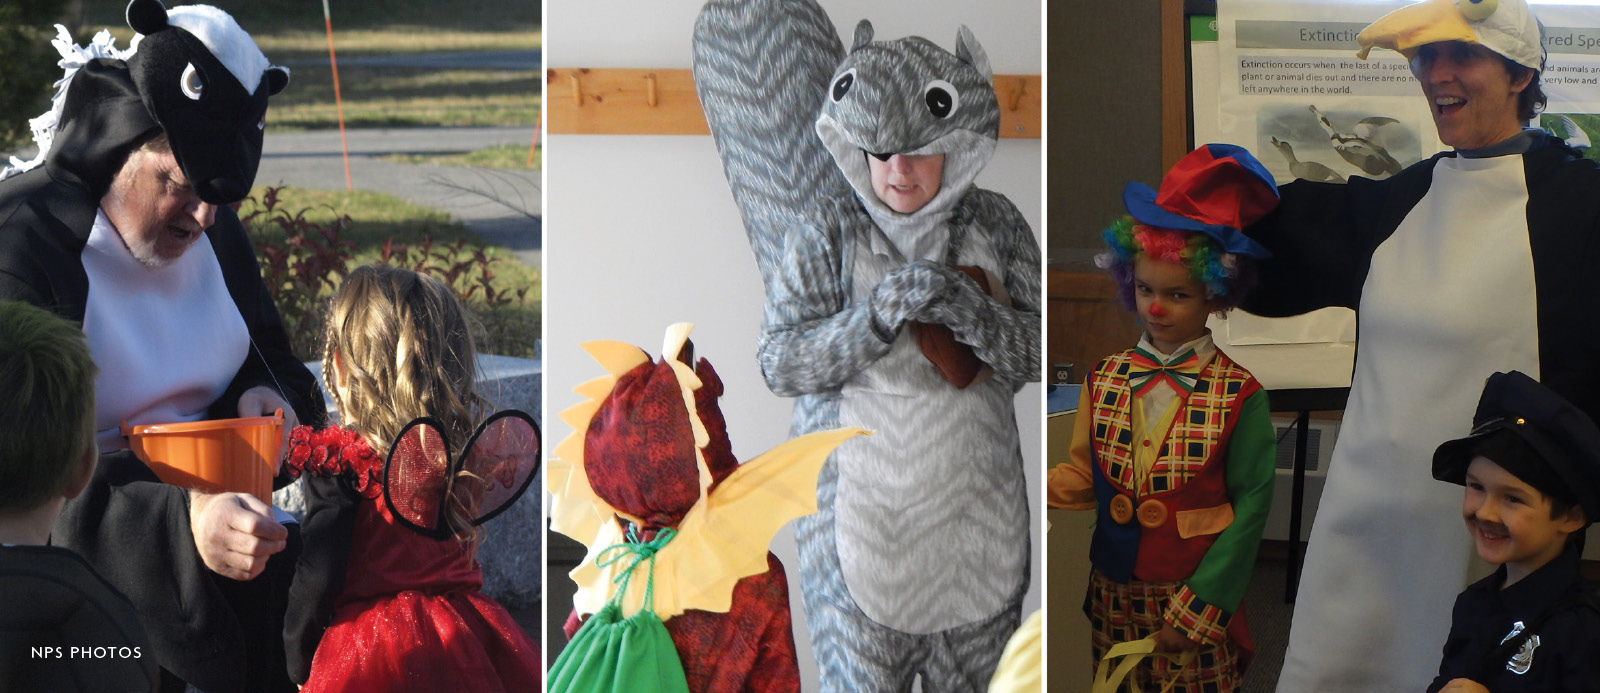 Collage of three photos with children dressed in Halloween costumes